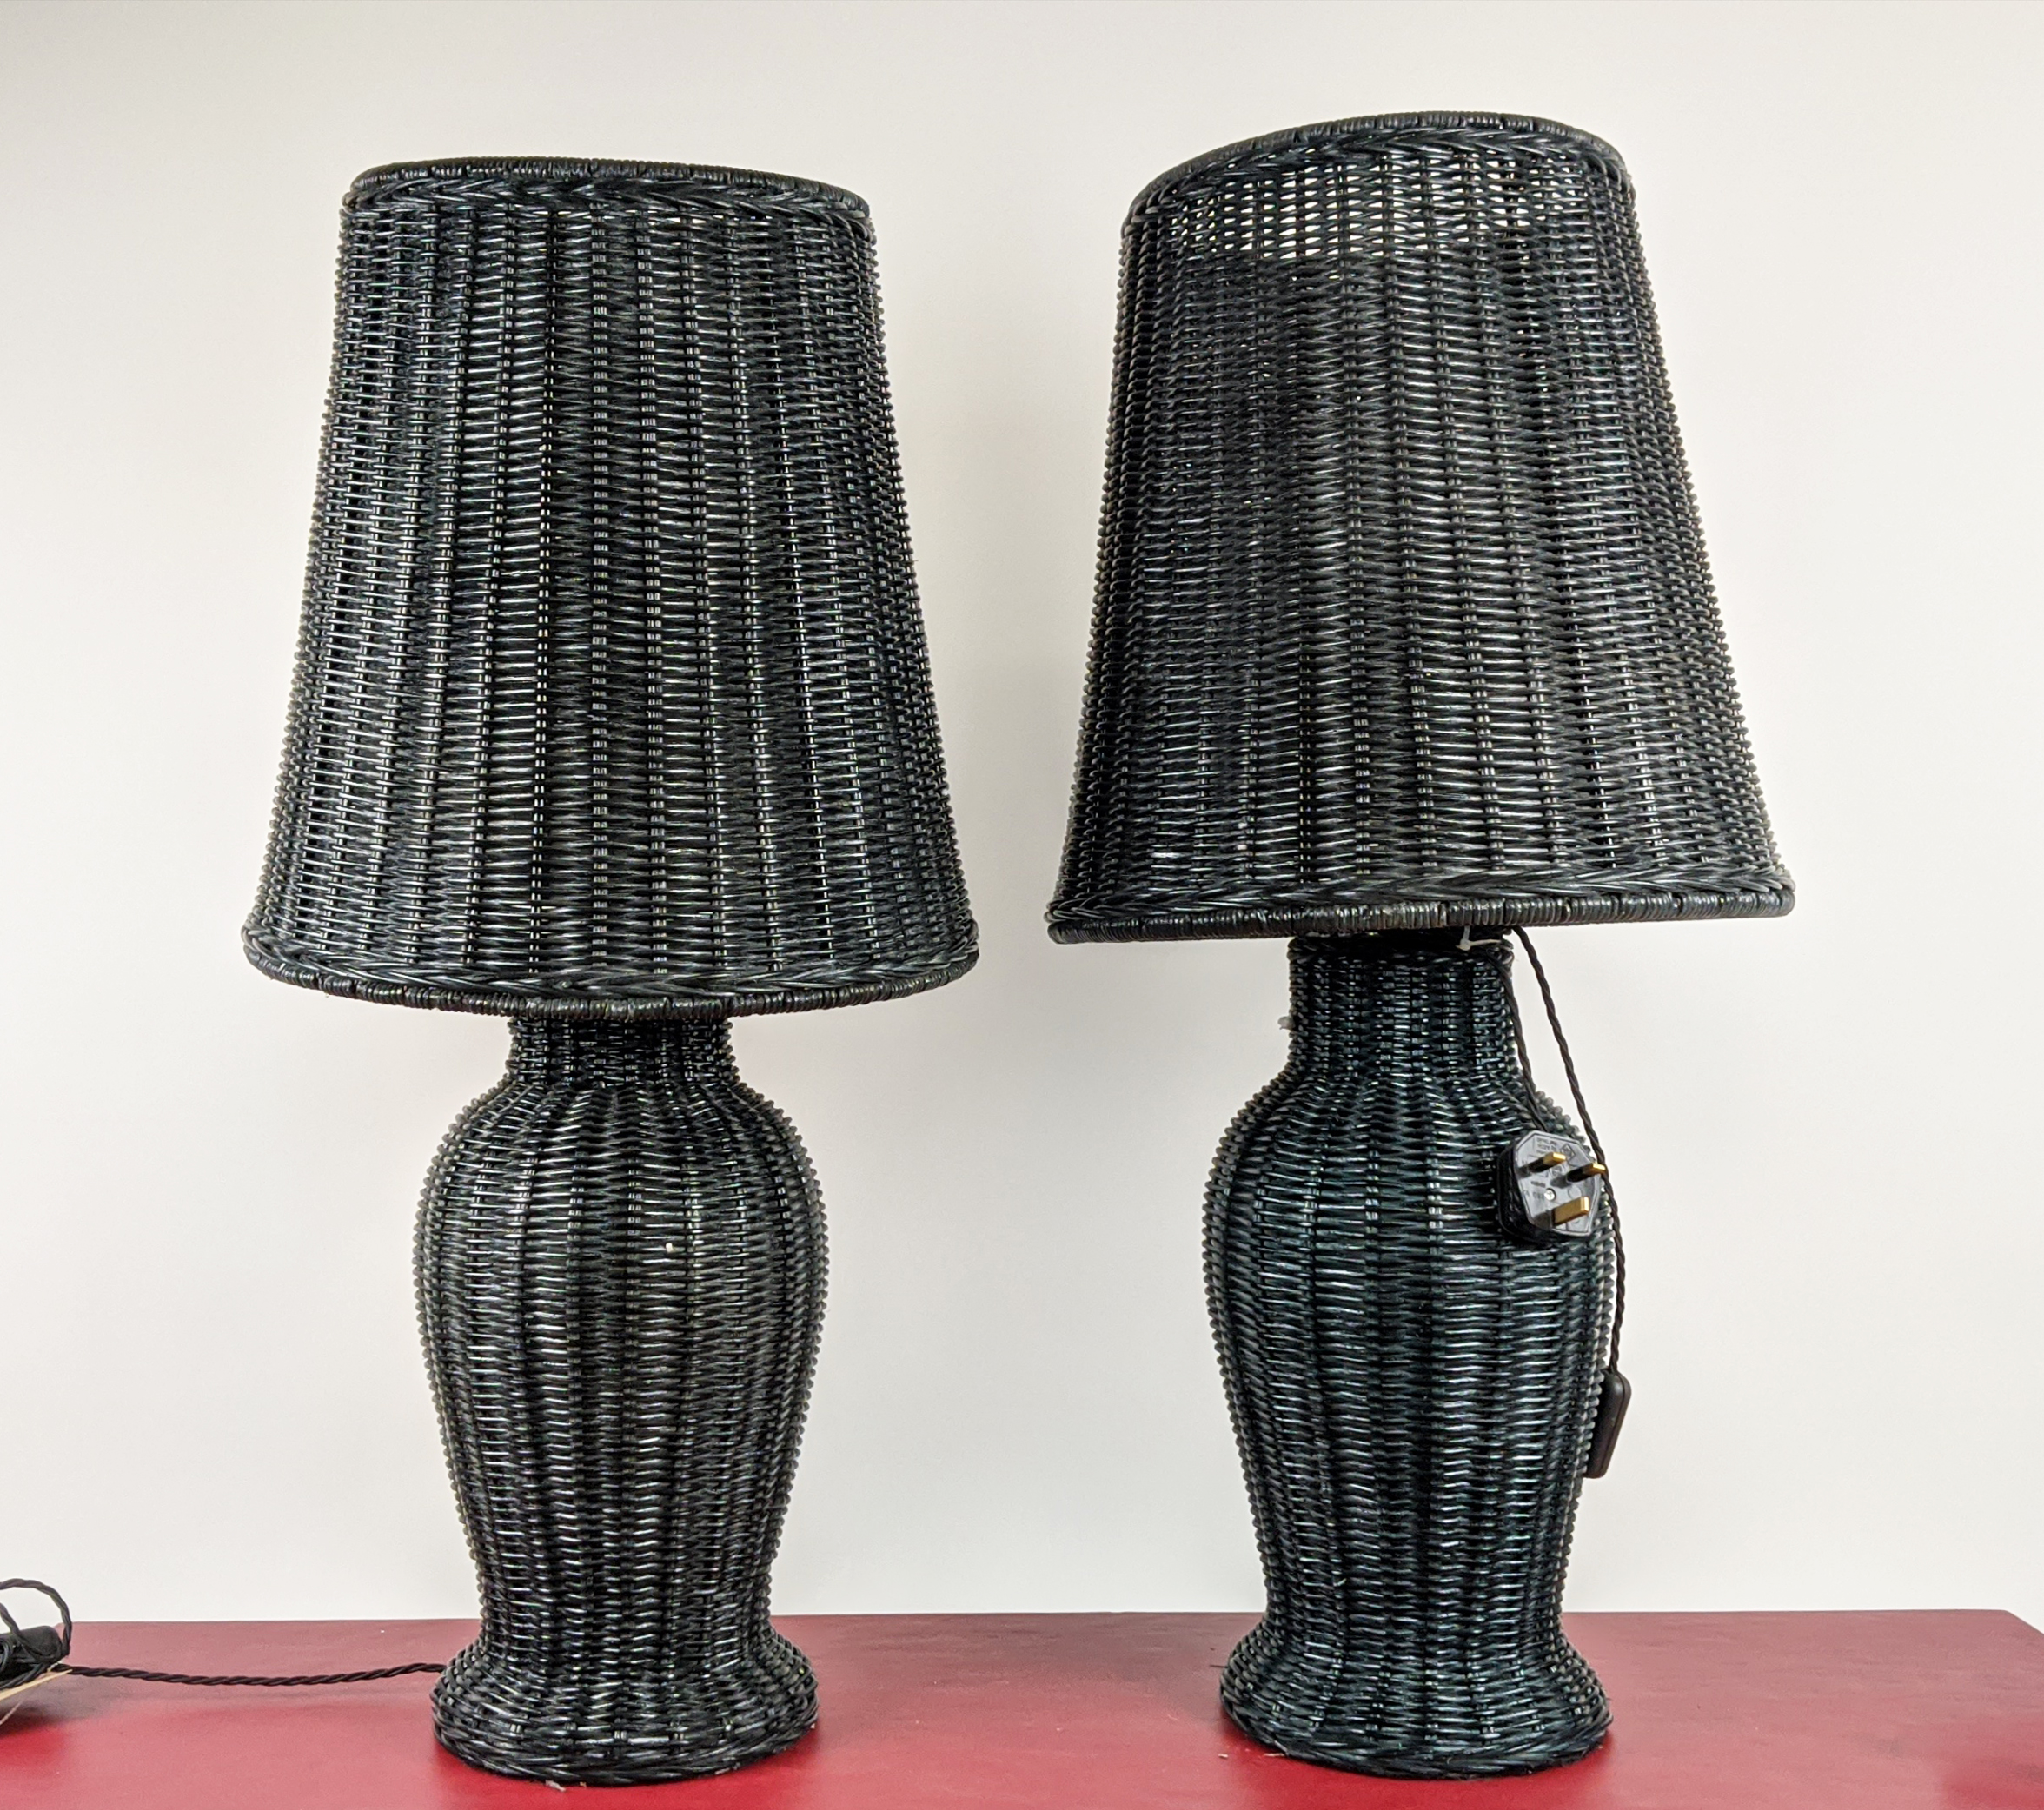 PAOLO MOSCHINO NOVA TABLE LAMPS, a pair, with shades, 82cm H. (2)